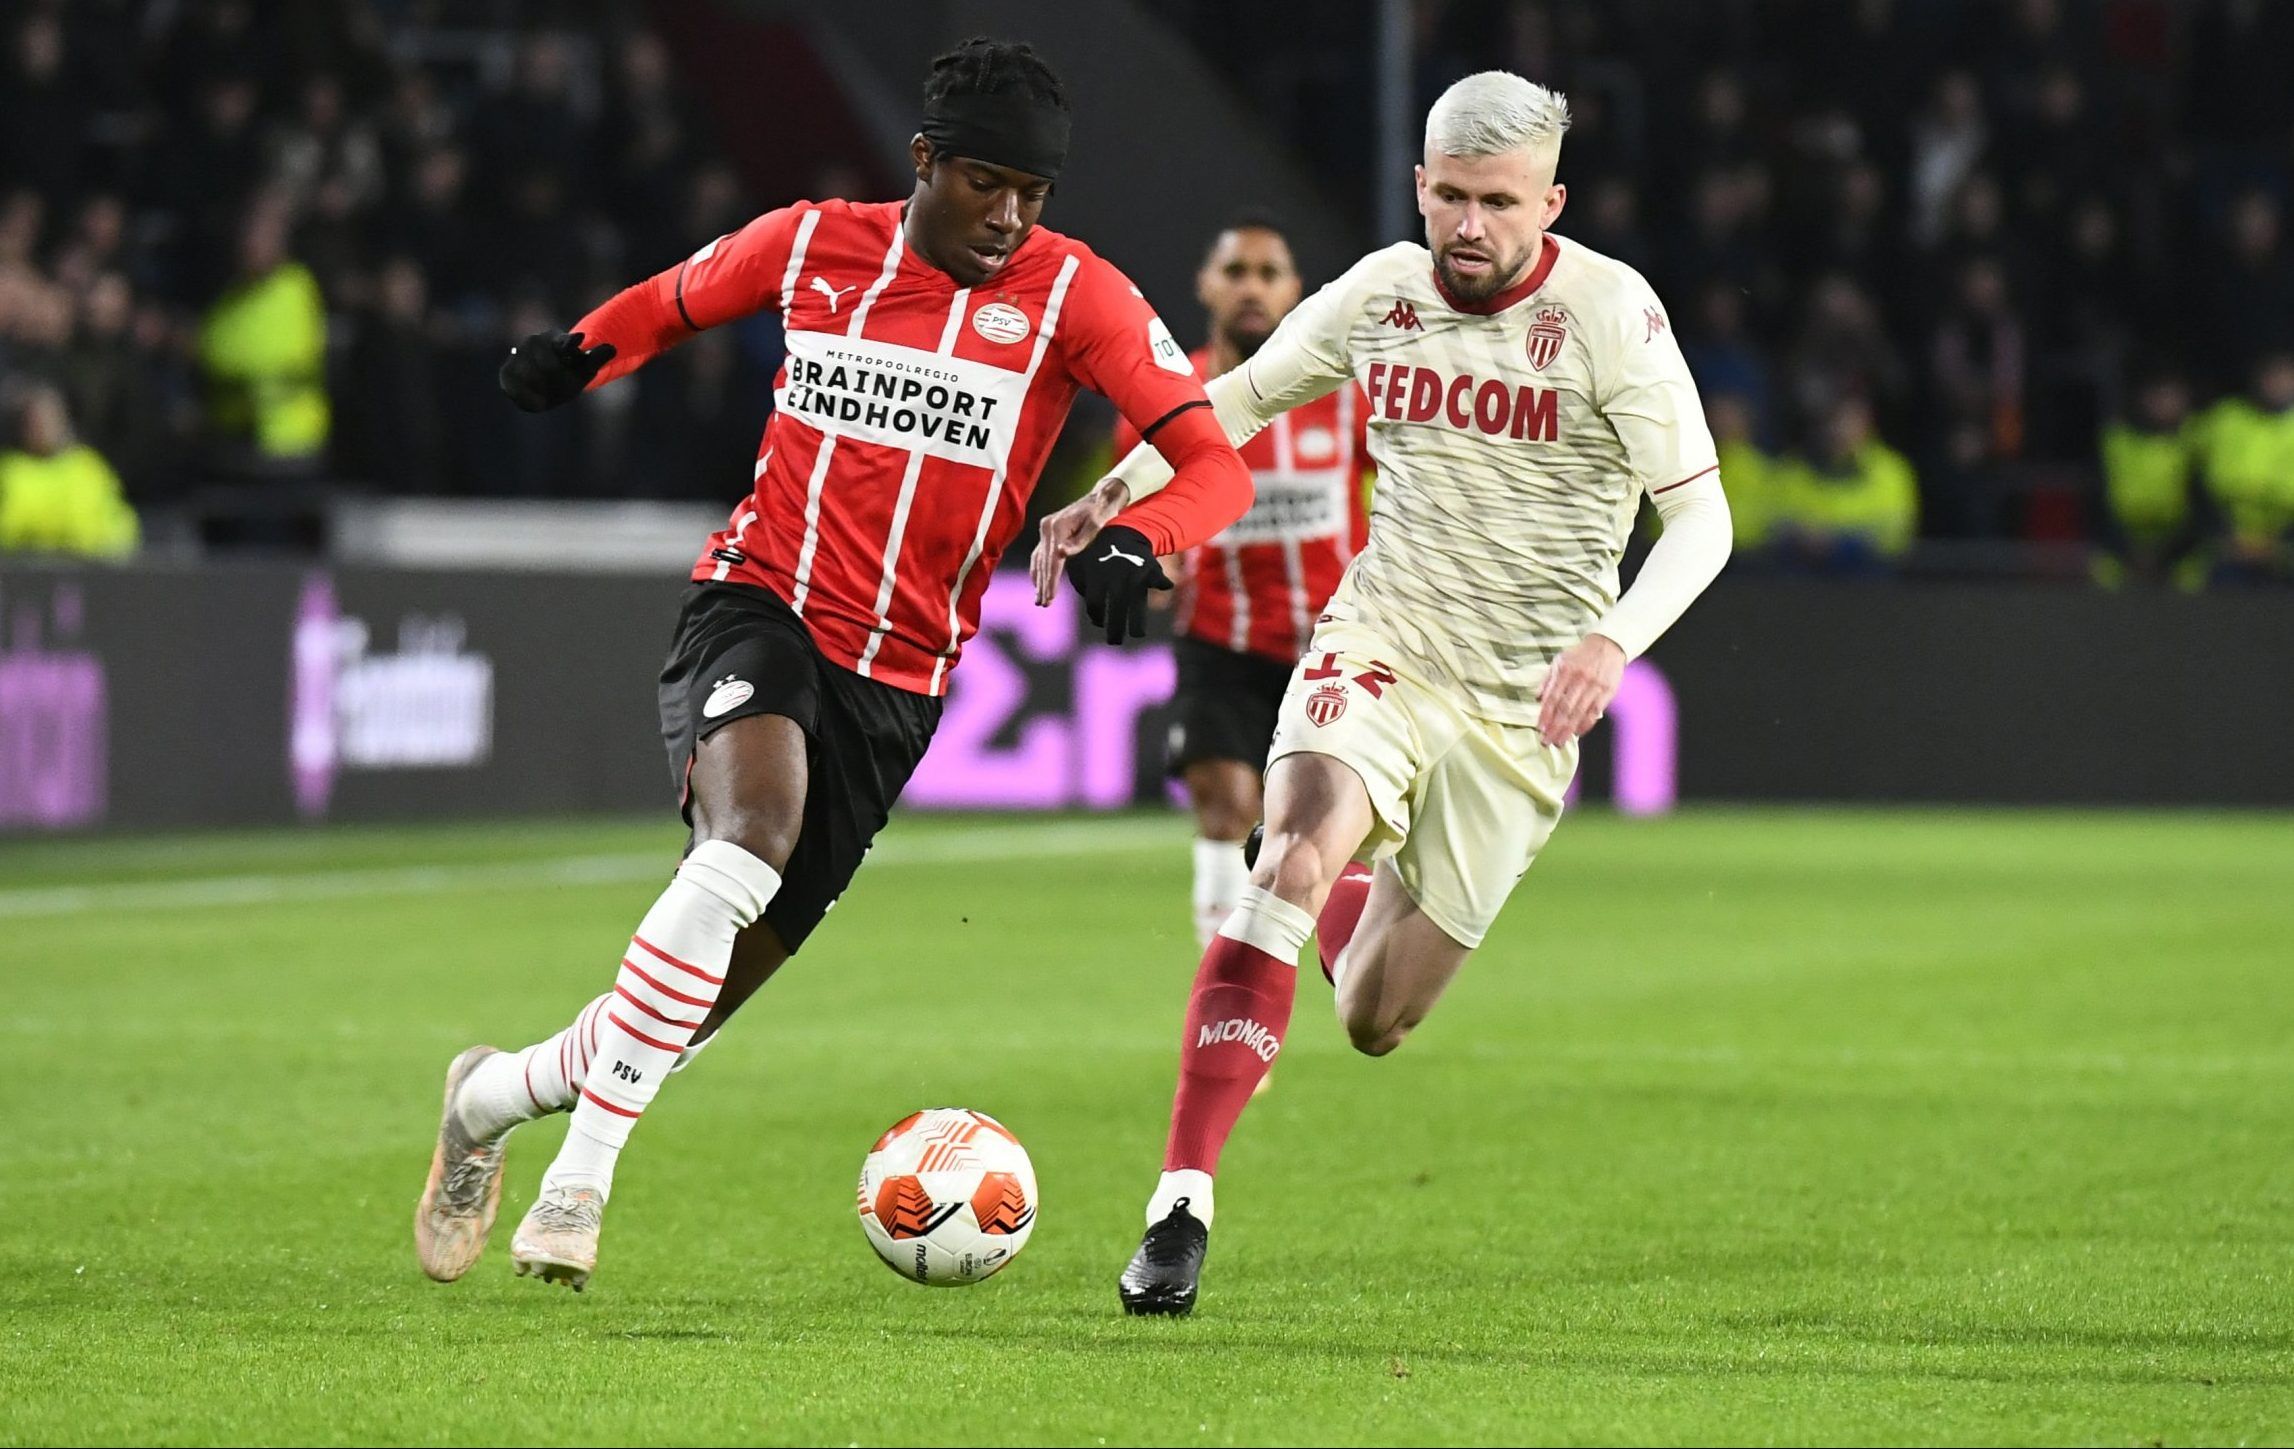 PSV Eindhoven's Noni Madueke in action against Monaco in the Europa League